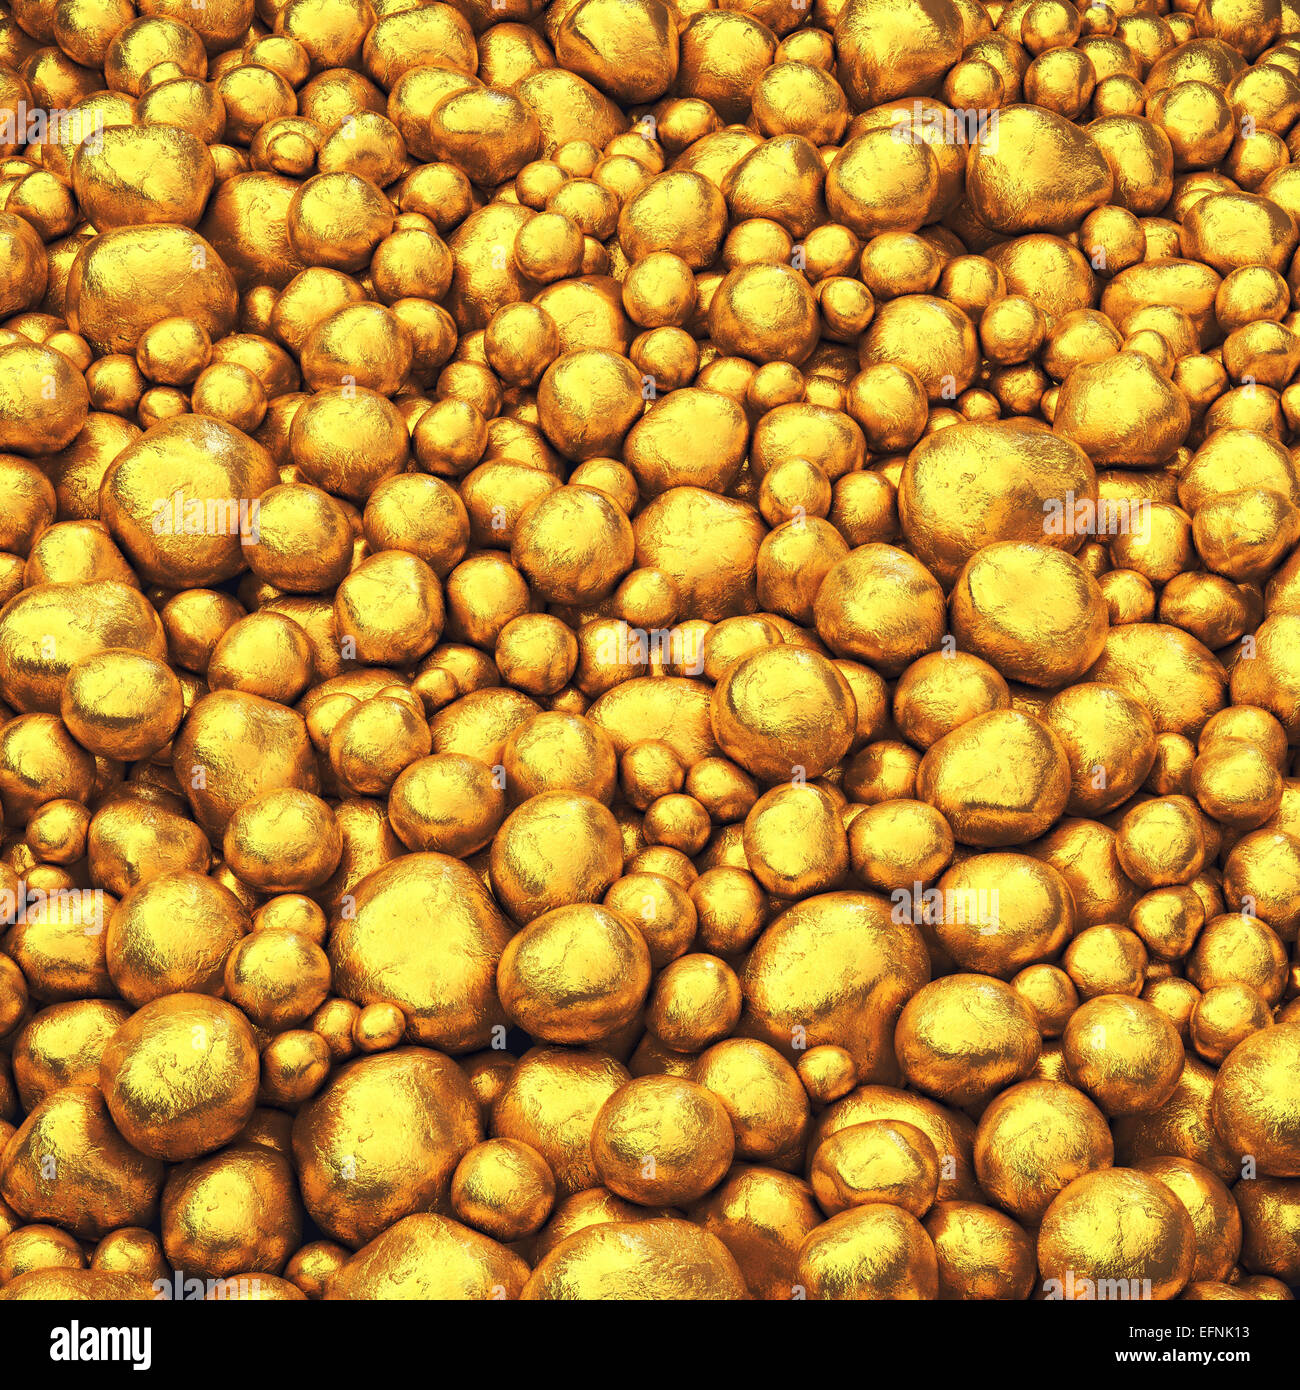 720+ Gold Dust Pile Stock Photos, Pictures & Royalty-Free Images - iStock